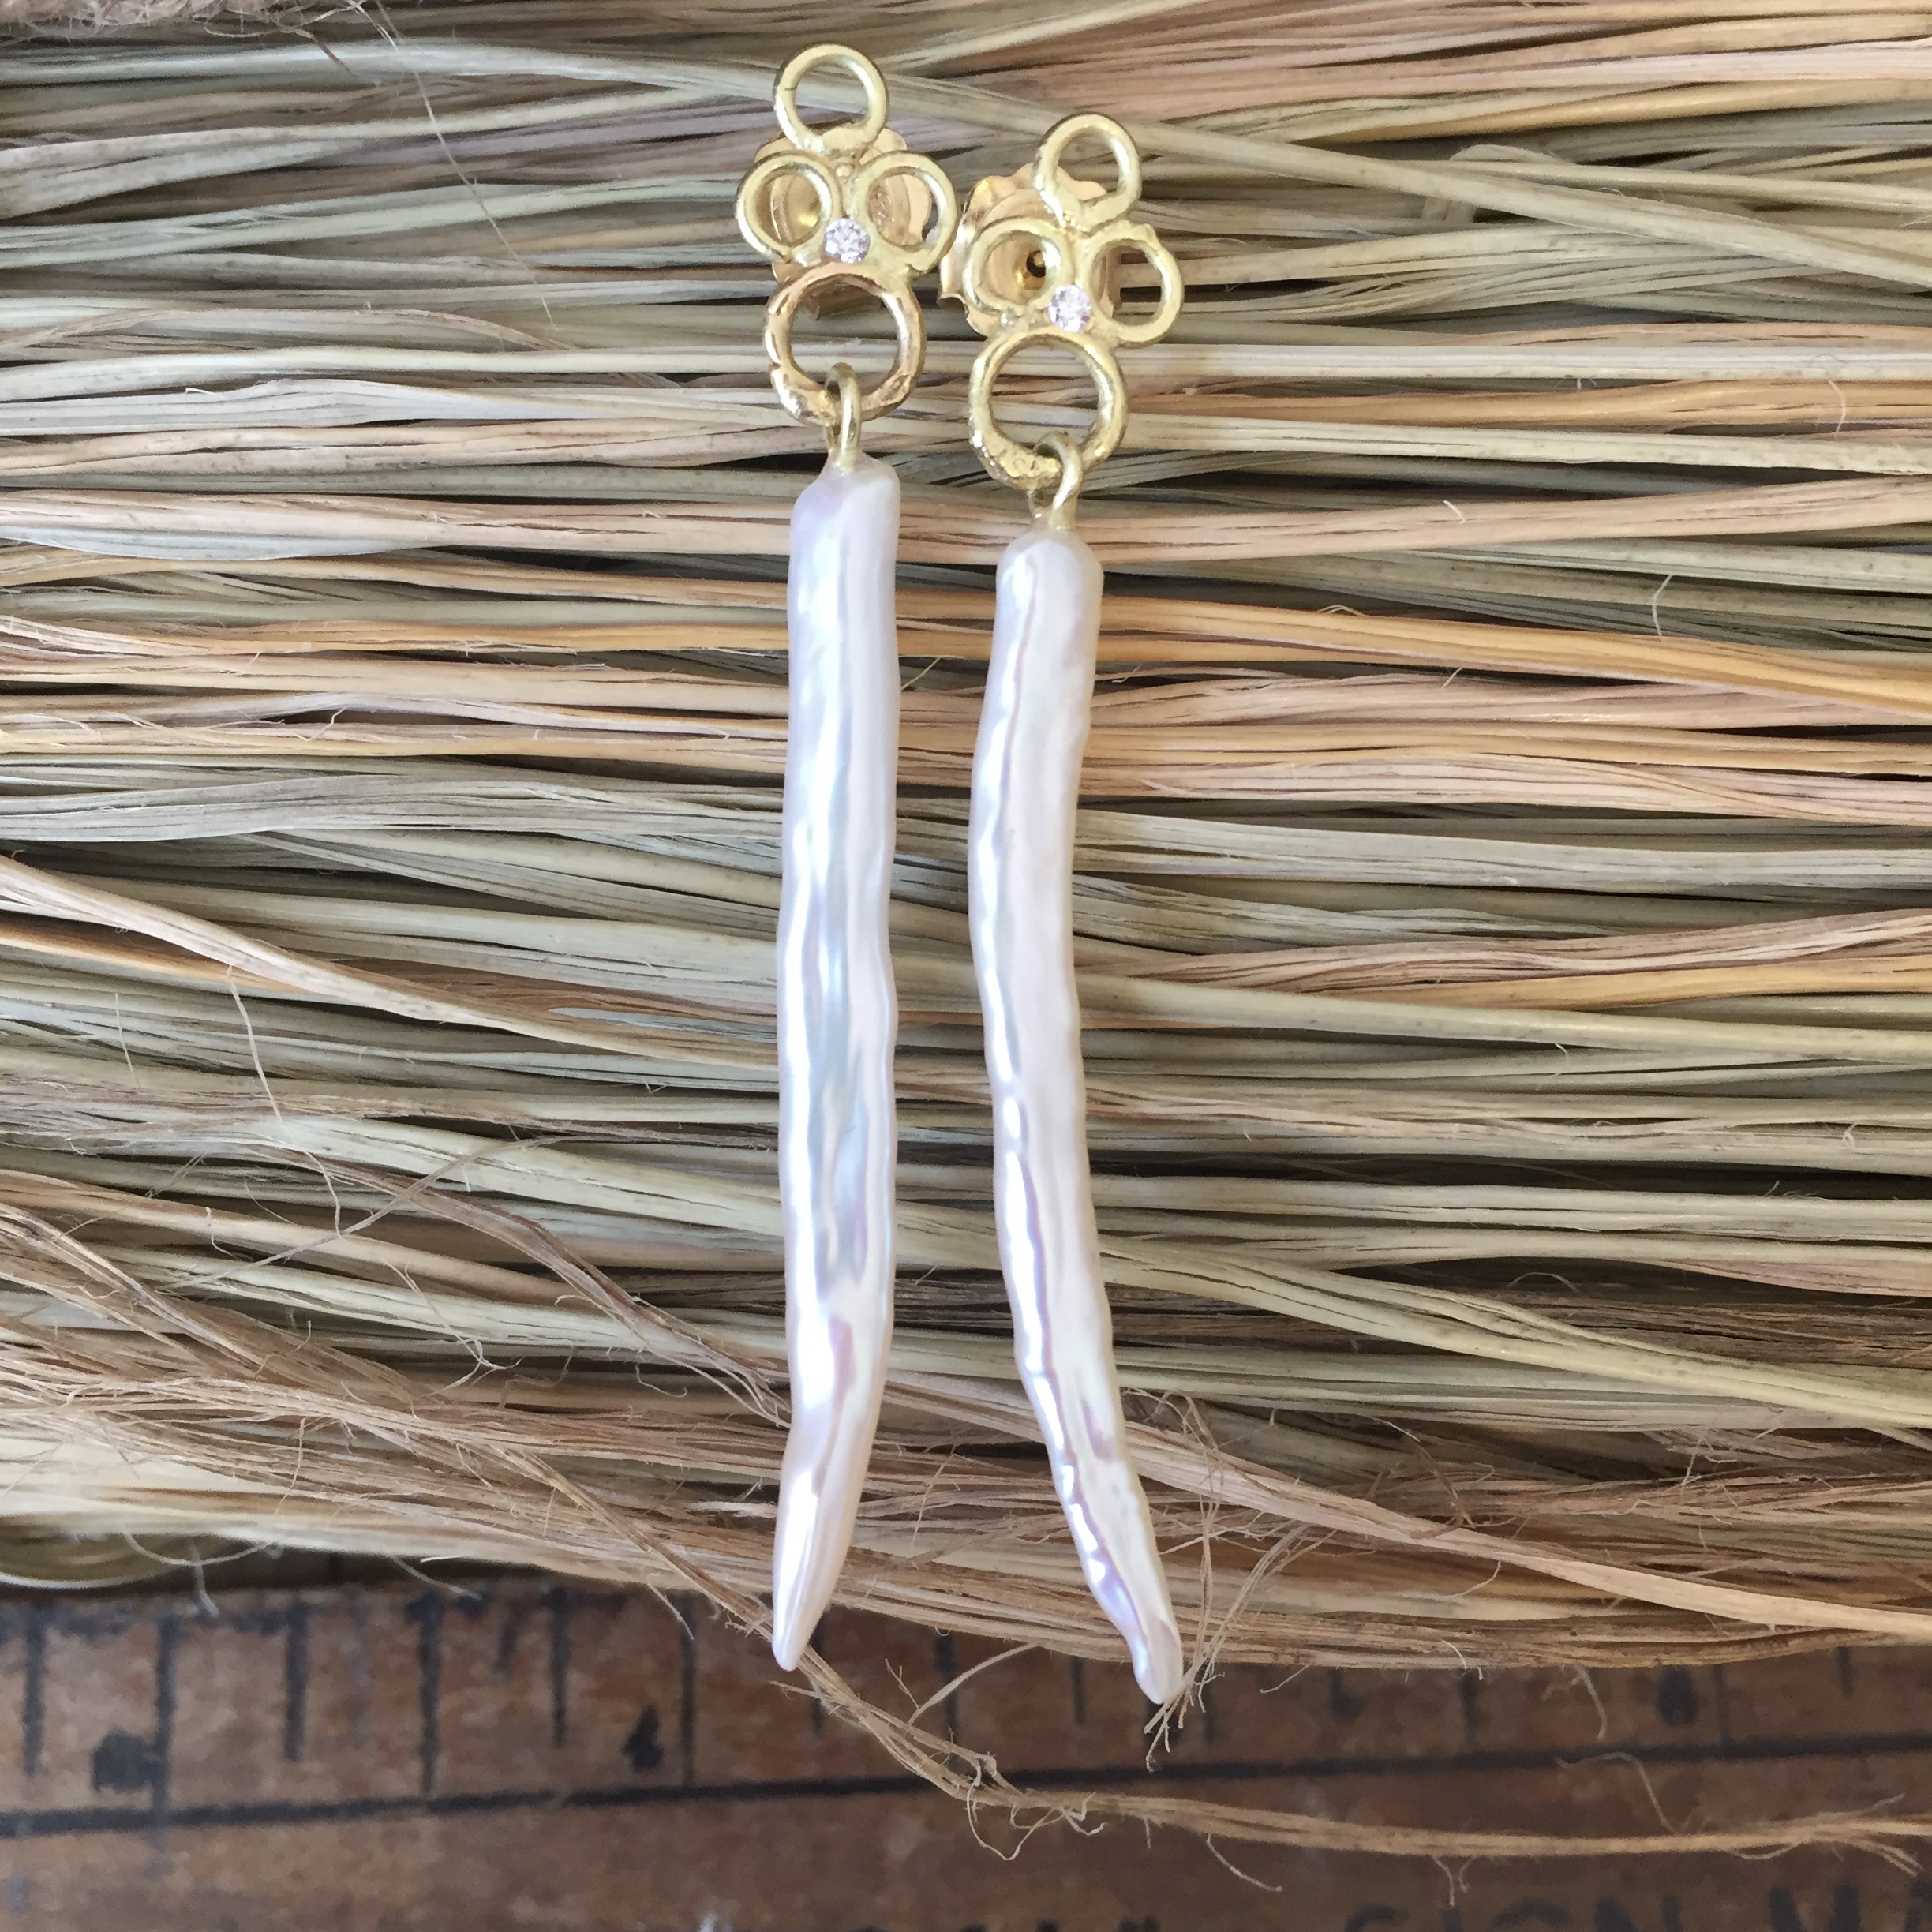 18ct Yellow Gold Bubble Tusk Earrings with White Diamonds